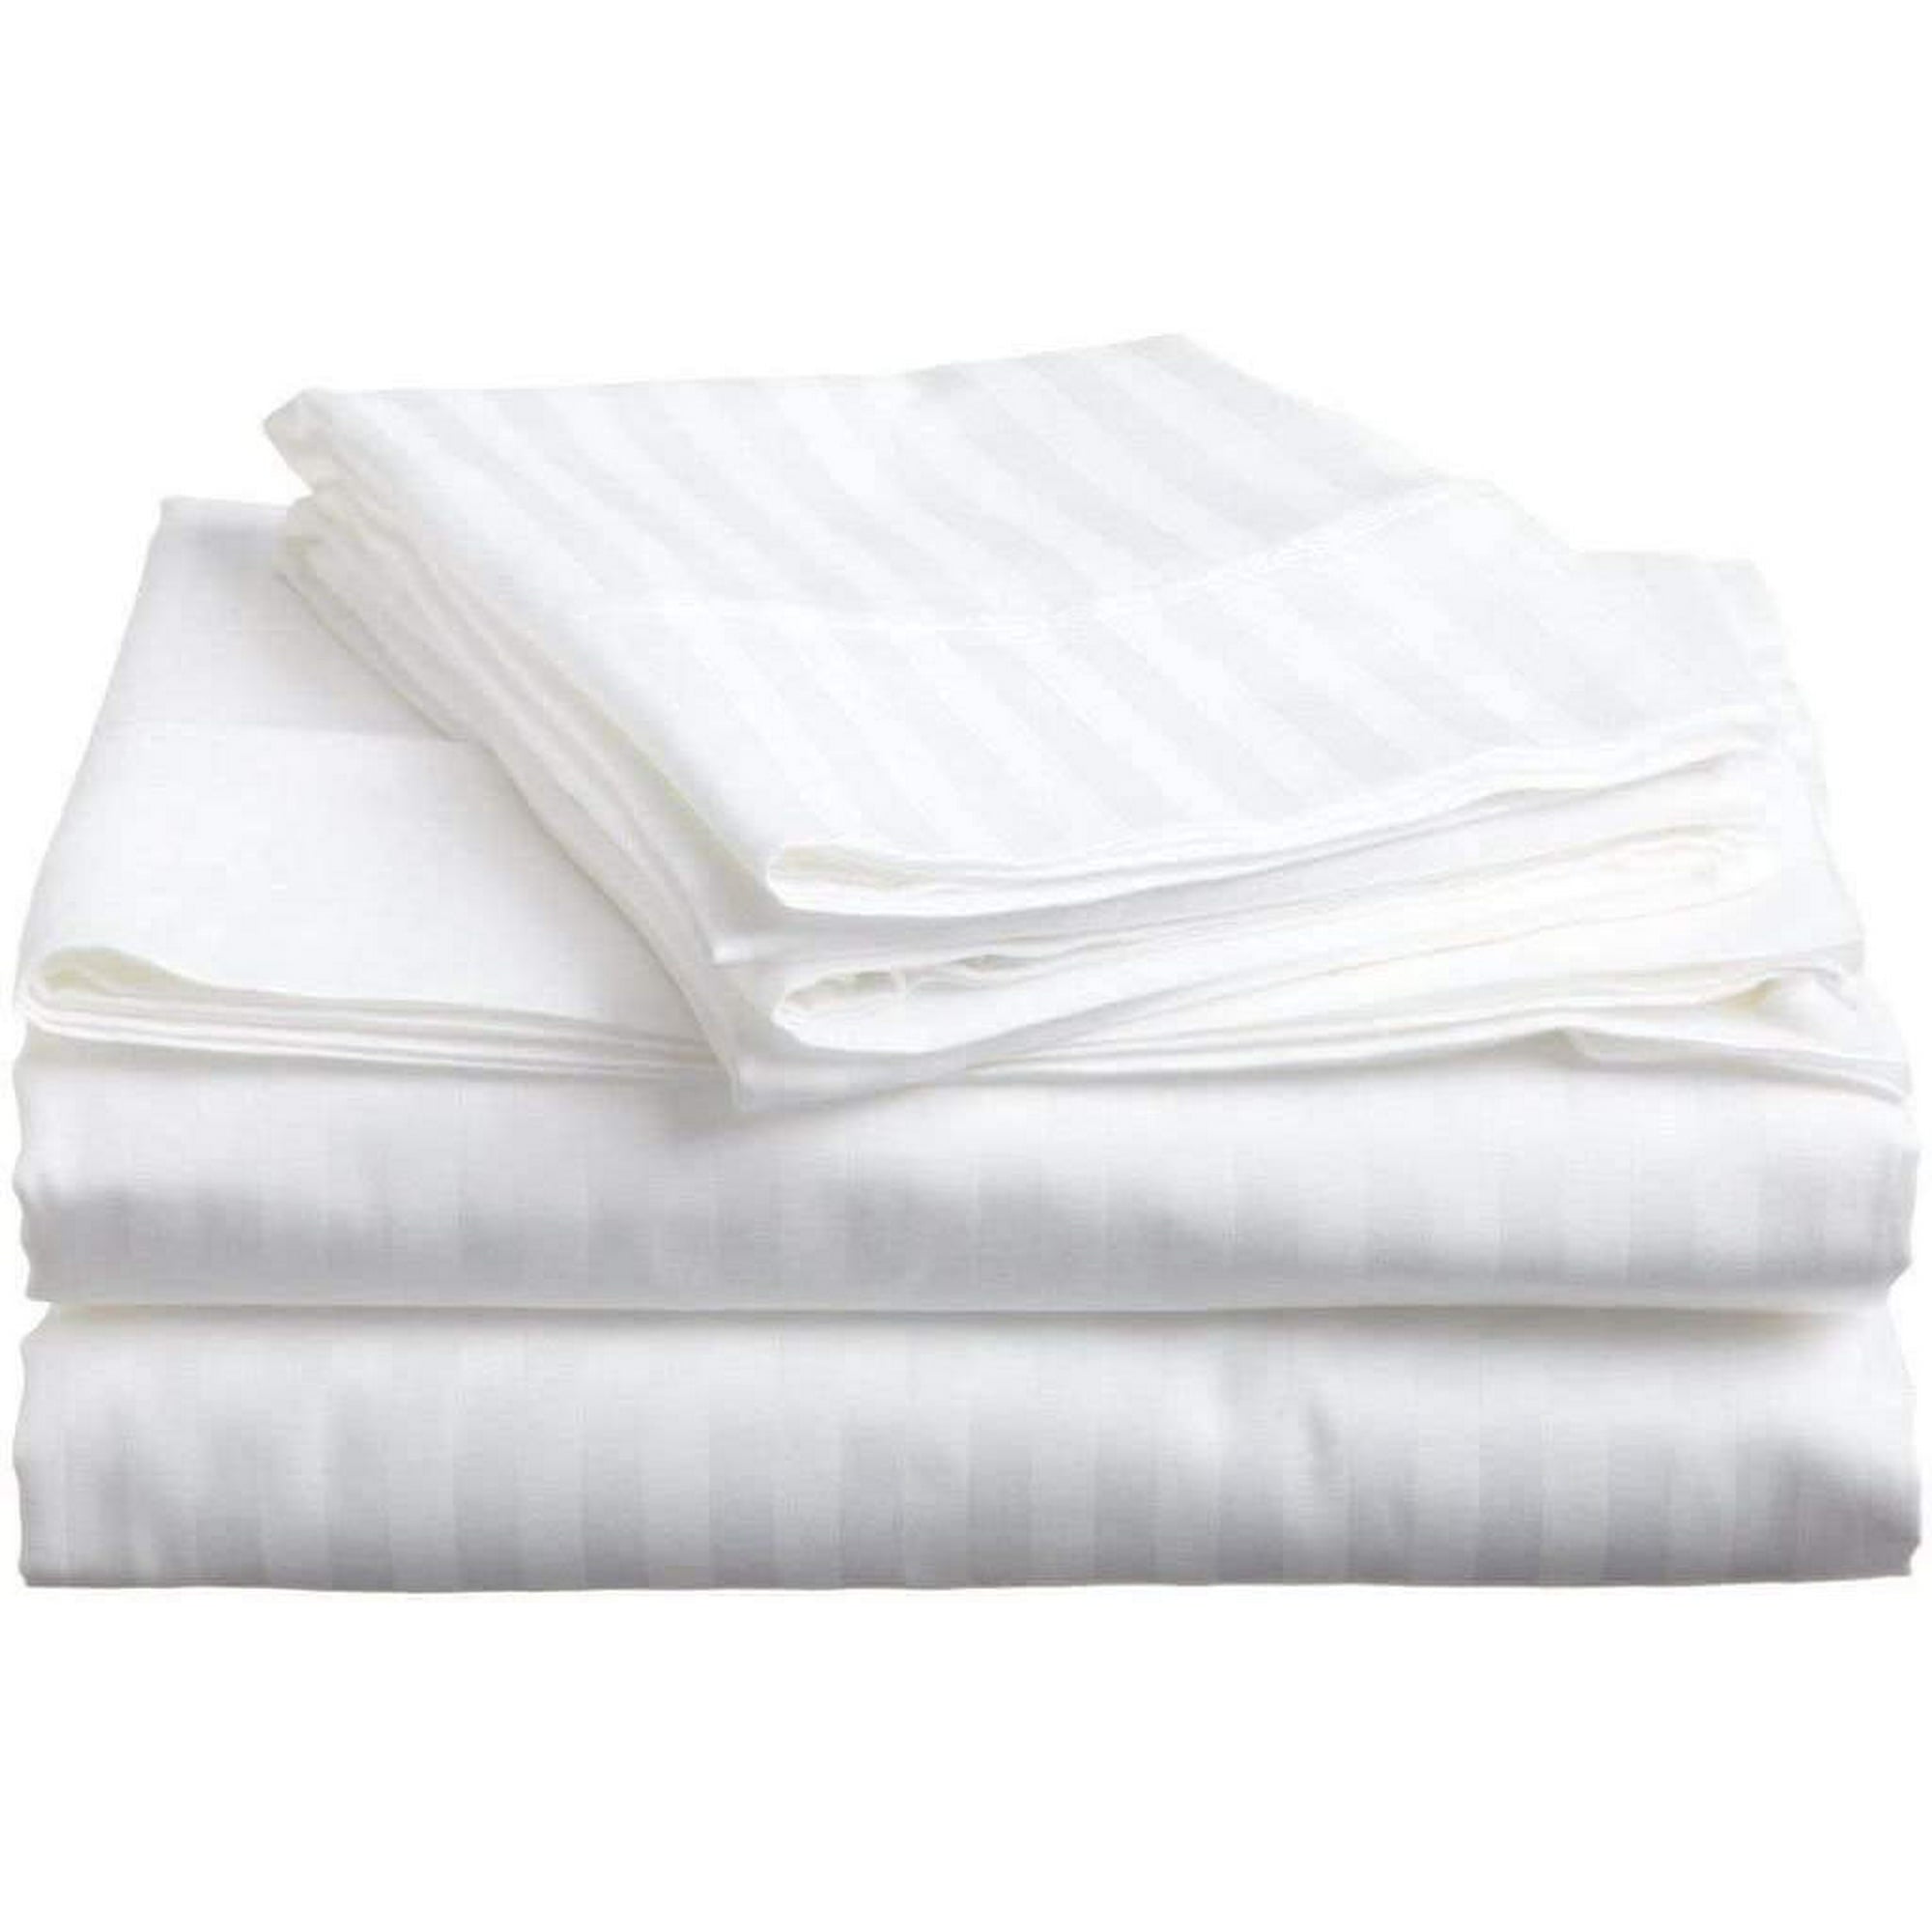 1000-Thread-Count 100% Egyptian Cotton Sheet Set Full Size Fits 6-9 Inches Deep Pocket ( Stripe, Classic White )